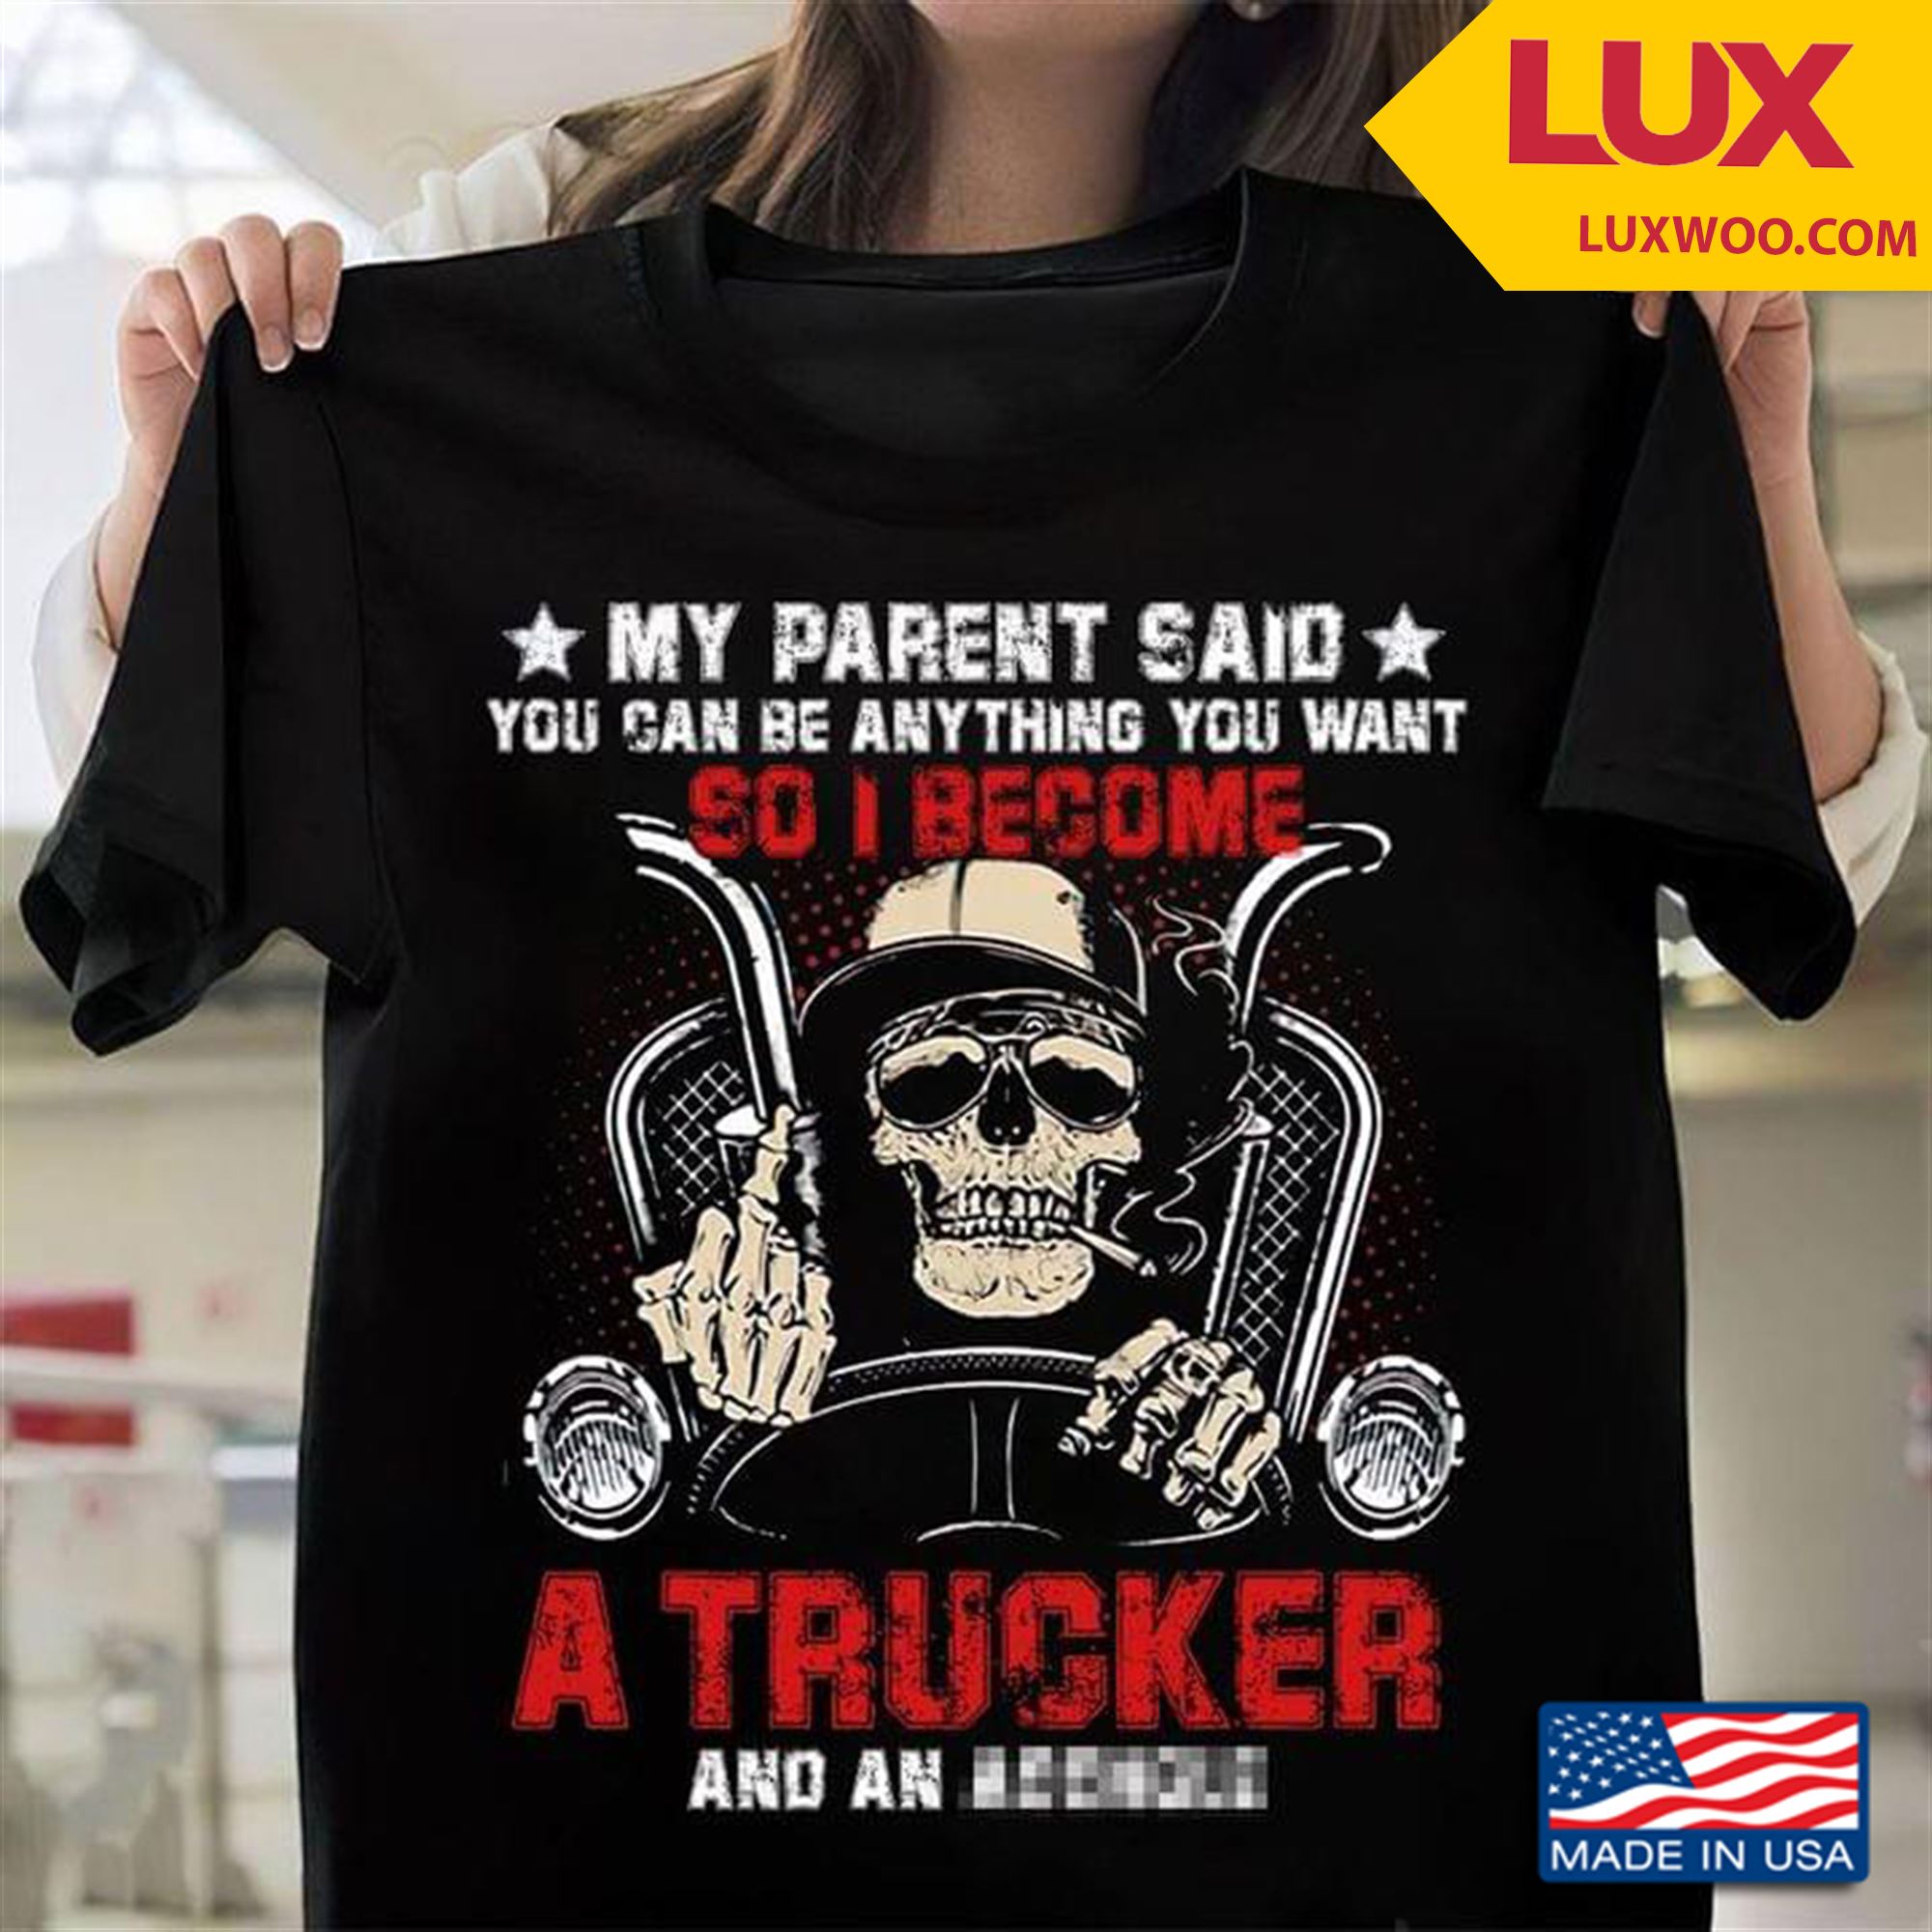 My Parent Said You Can Be Anything You Want So I Become A Trucker Tshirt Size Up To 5xl